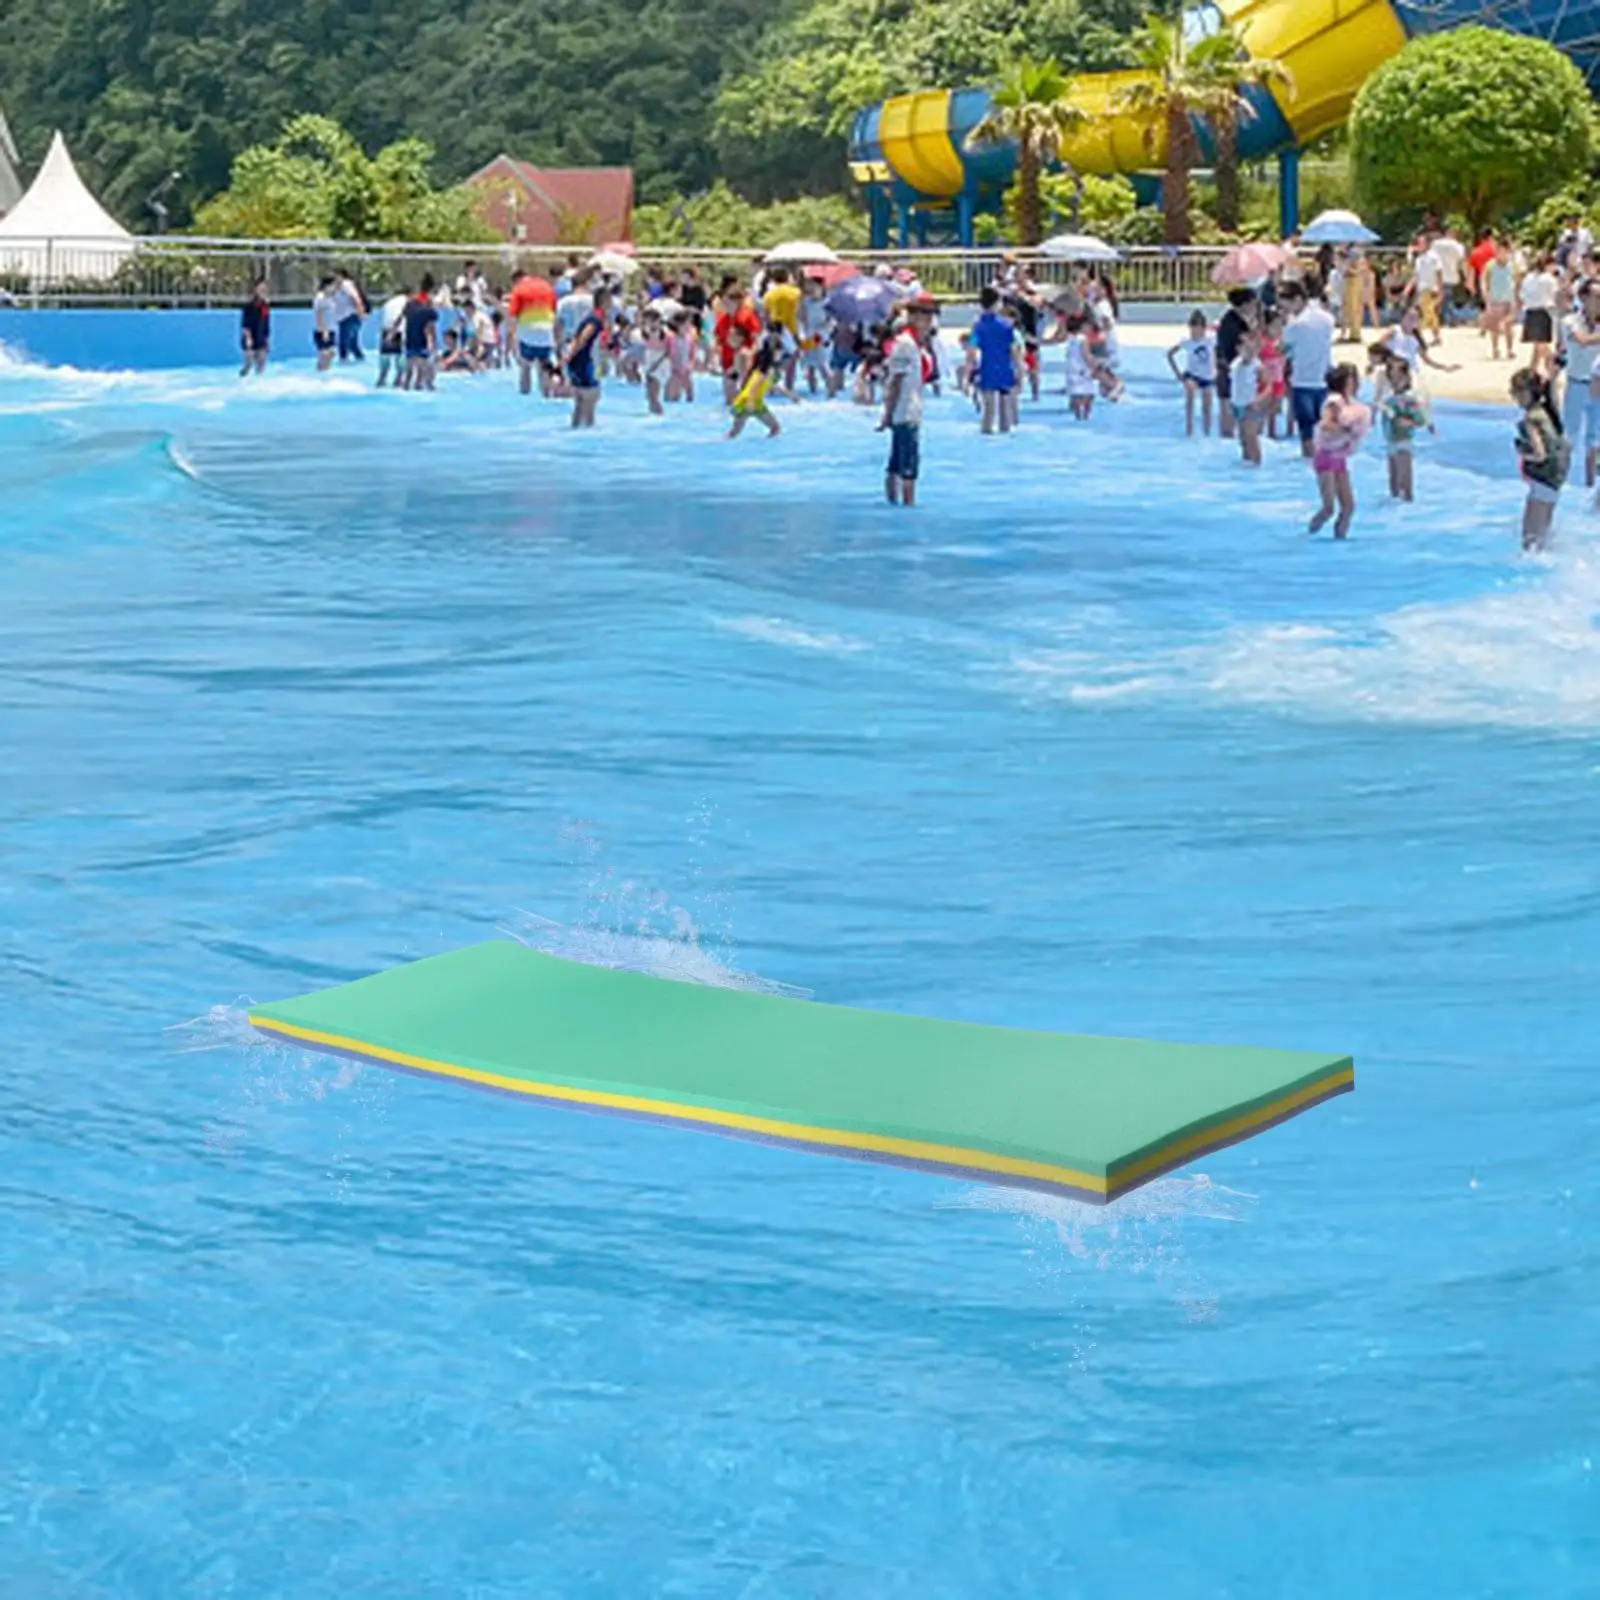 Swimming Pool Floating Mattress Summer Fun Toy Water Blanket Mat Bed Tear Resistant Foam Outdoor Floating Water Pad